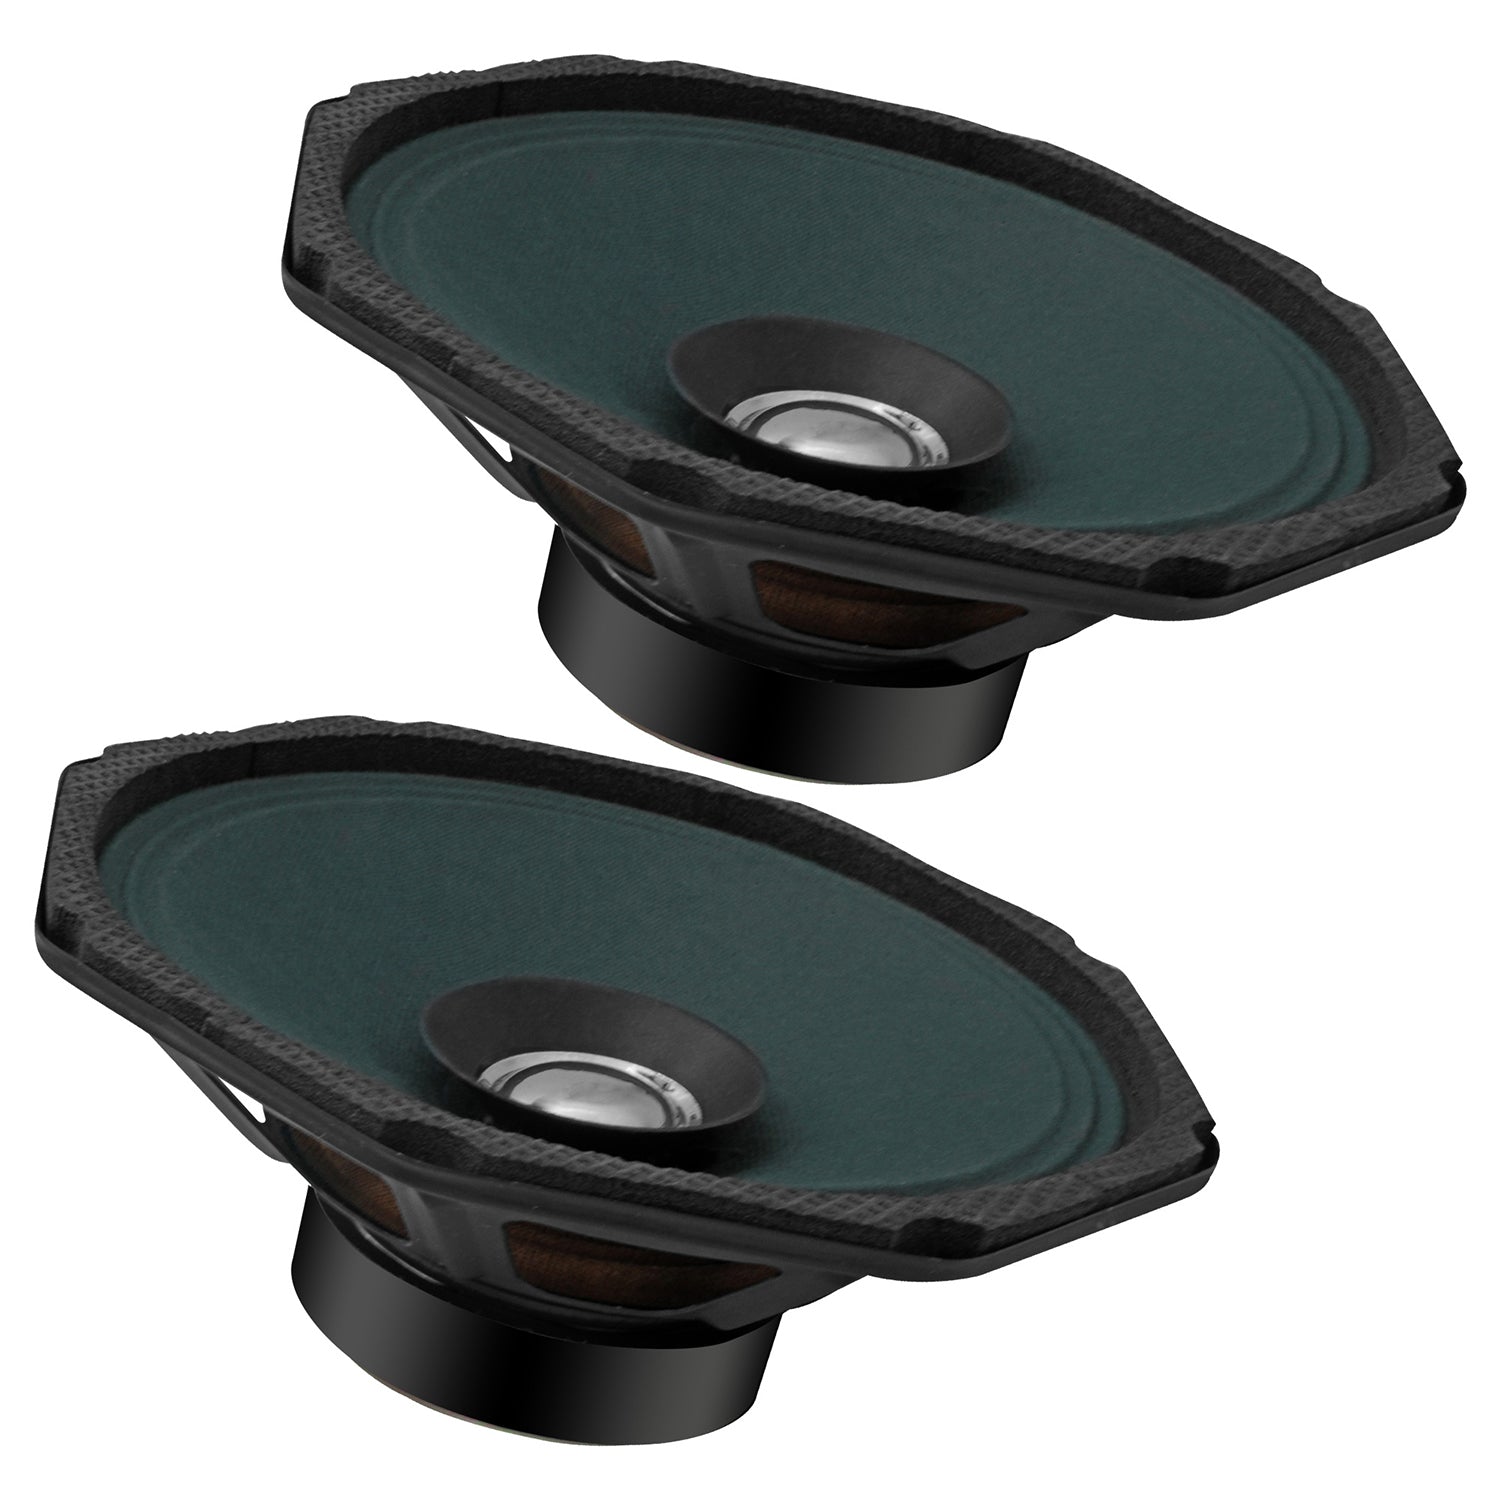 High-Performance Car Audio: 5 Core's 300W PMPO Speaker Driver